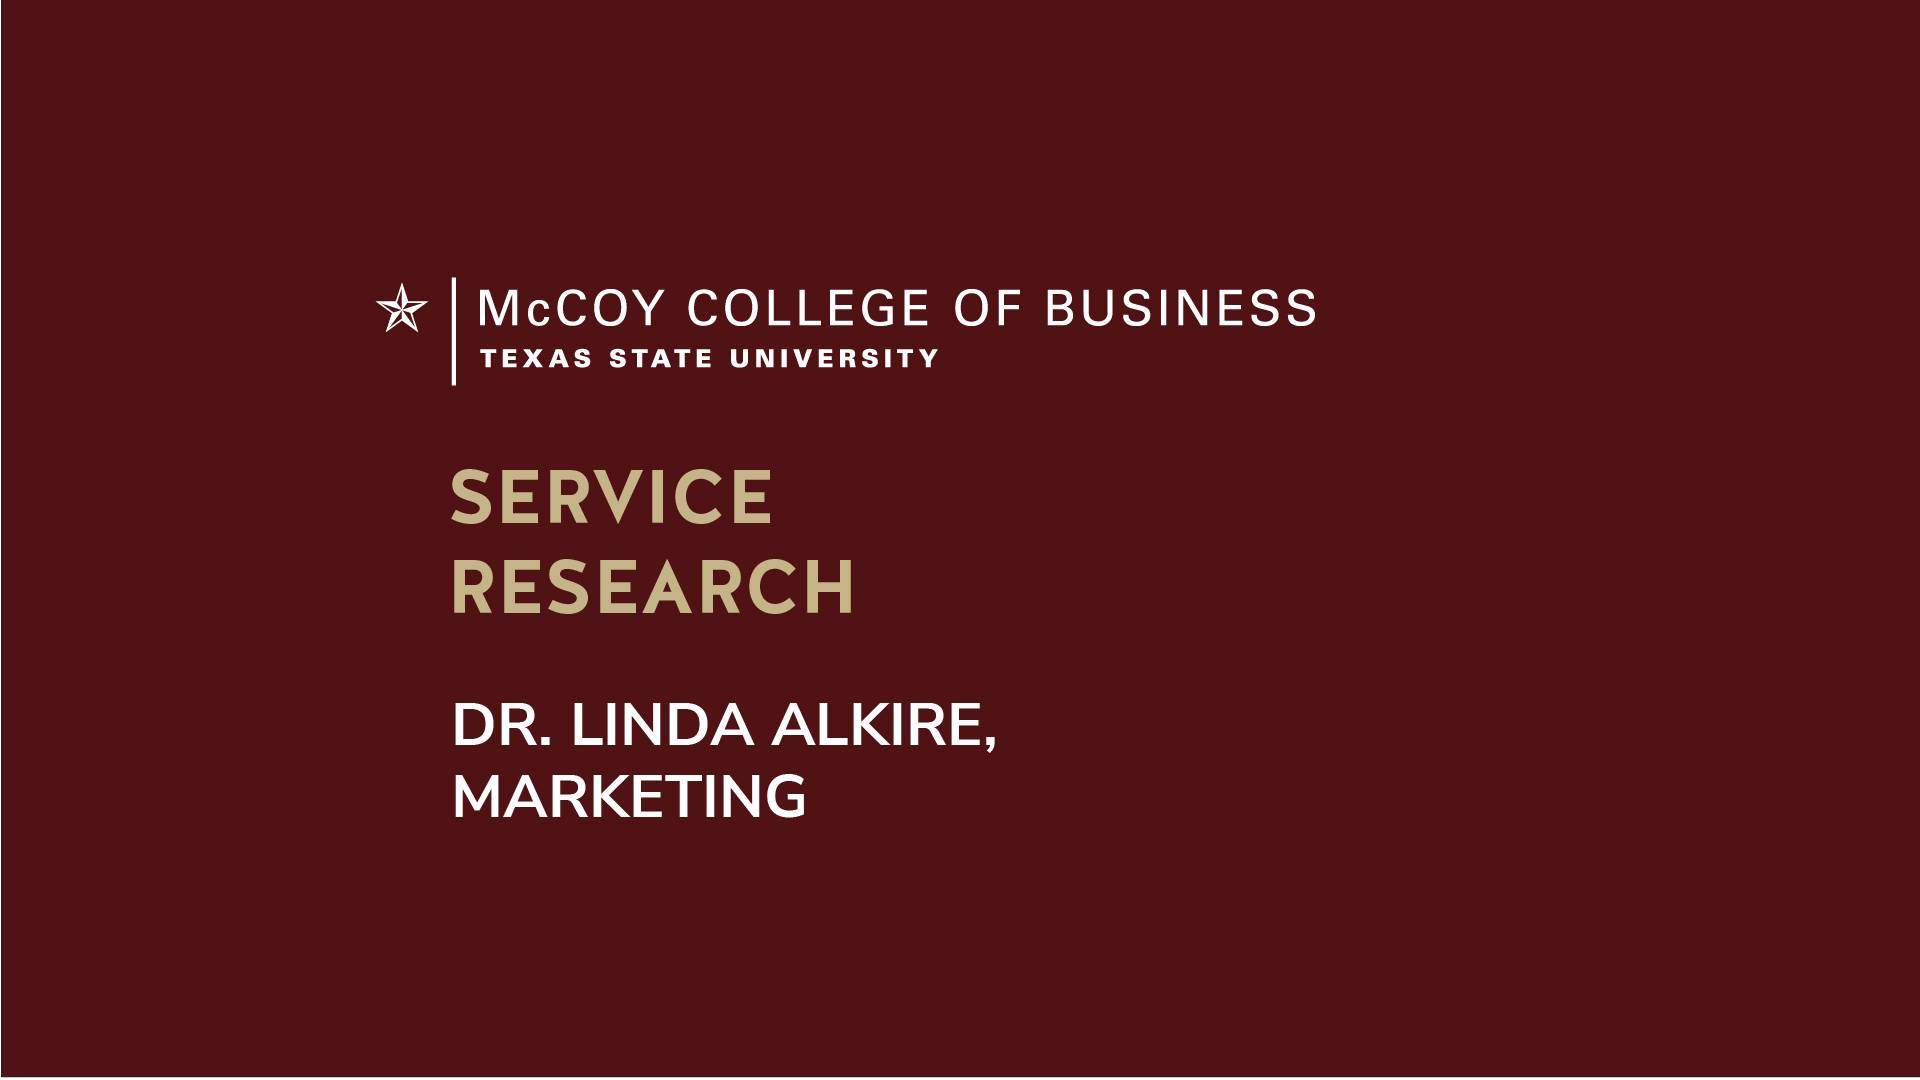 Dr. Linda Alkire speaks about Service Research